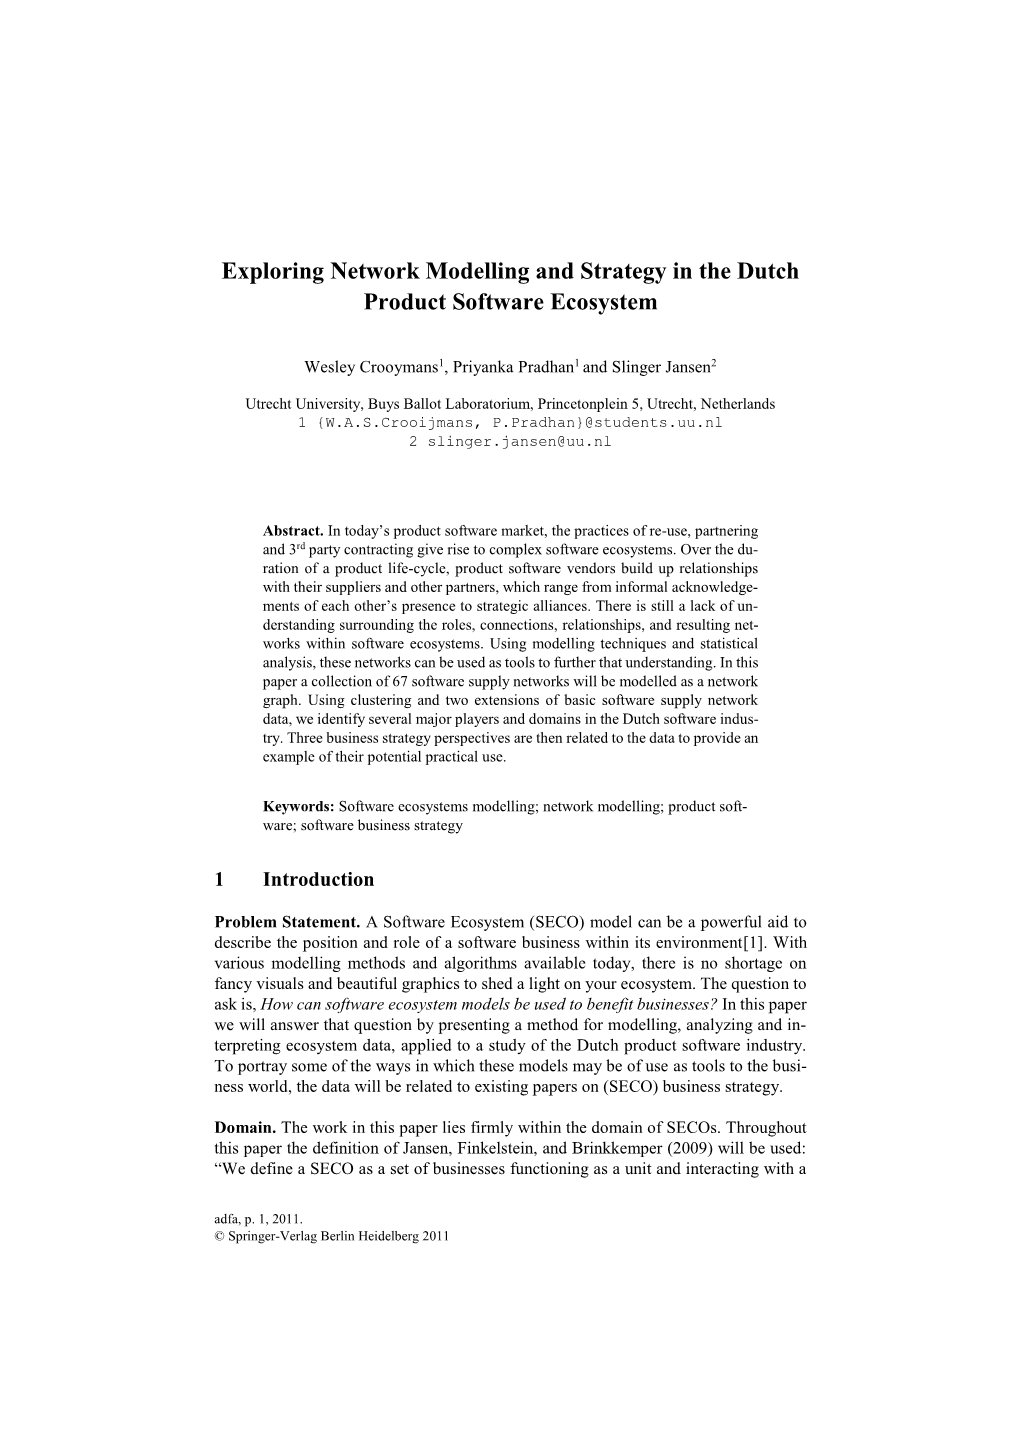 Exploring Network Modelling and Strategy in the Dutch Product Software Ecosystem